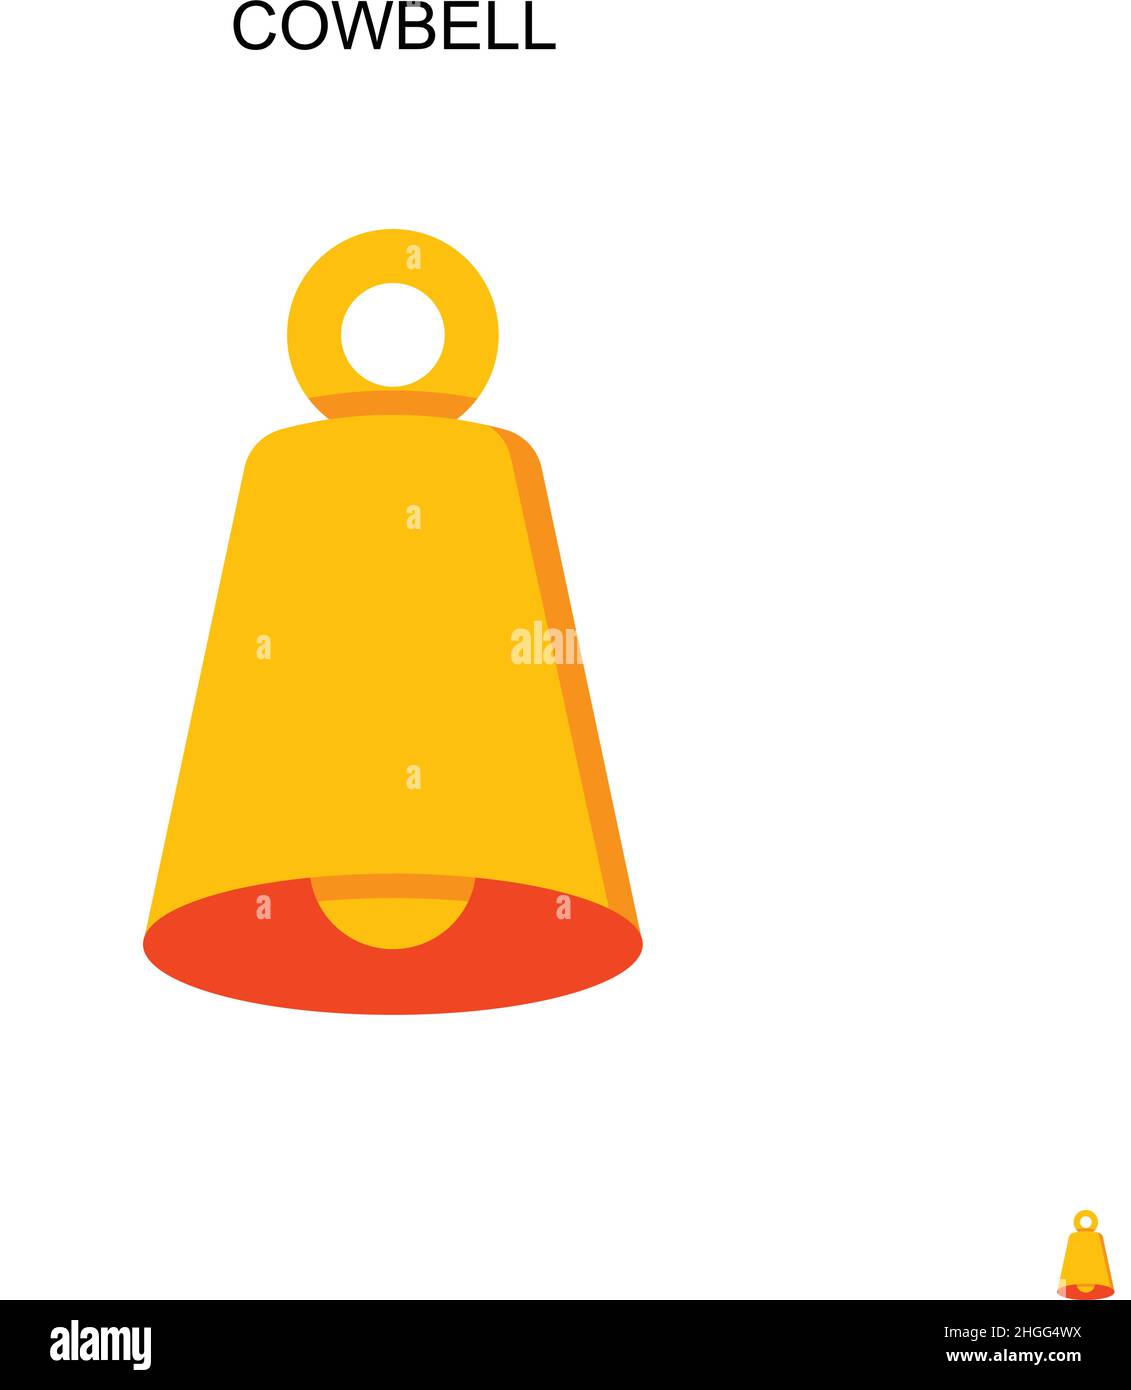 Cowbell Icon Simple Linear Style Cow Bell With Stick Symbol Stock  Illustration - Download Image Now - iStock